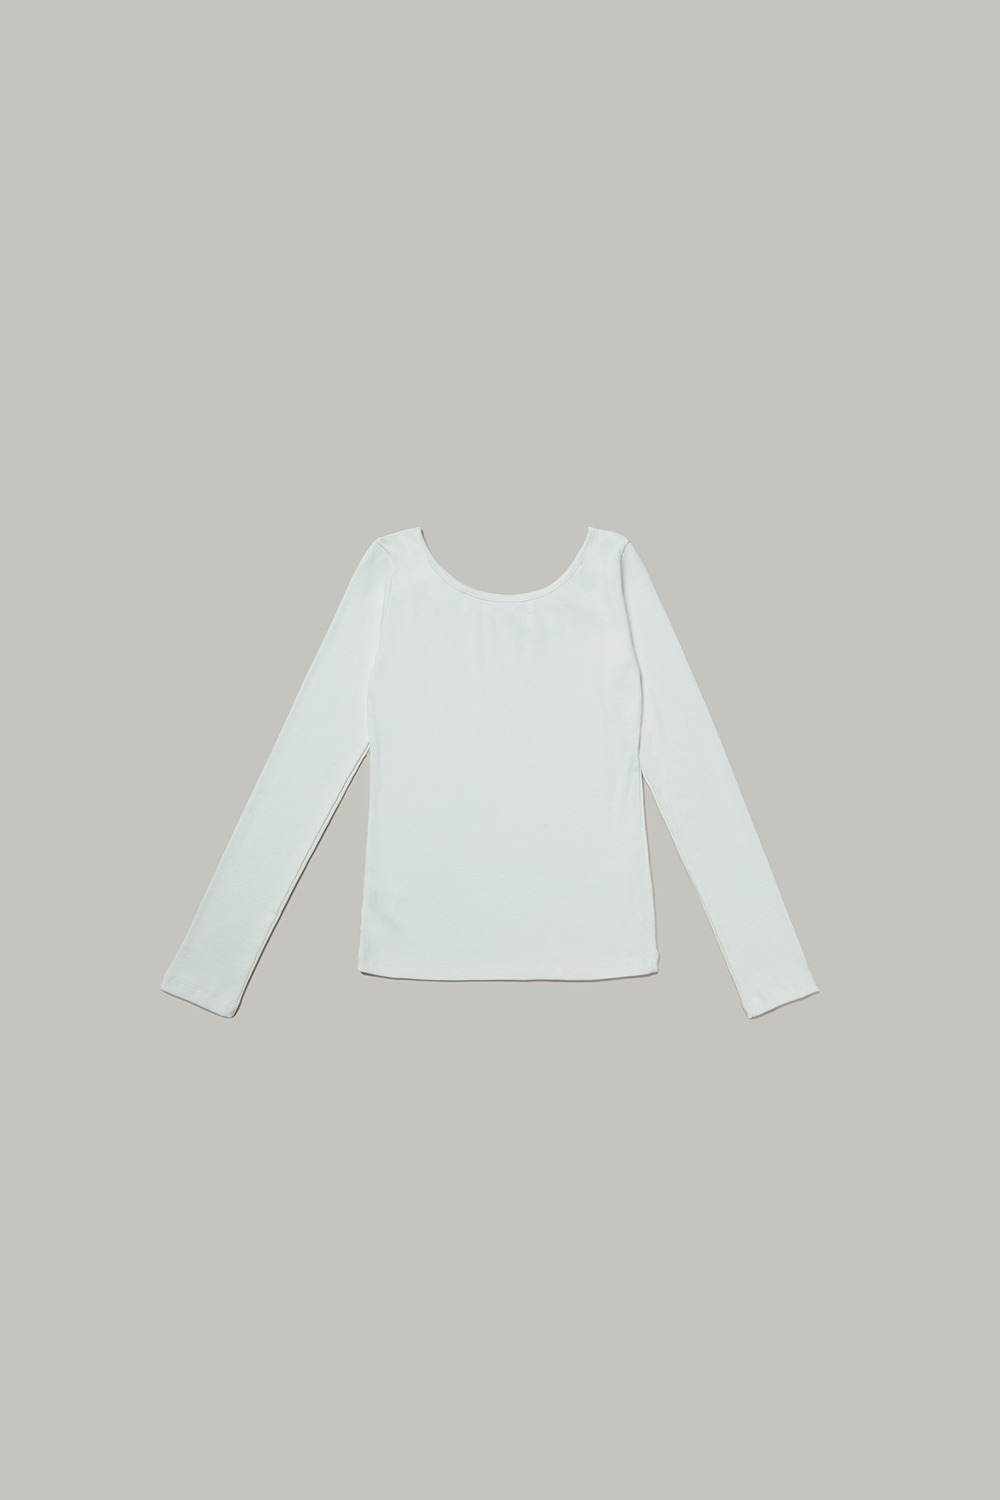 7th/Boat neck t-shirt (Ivory)